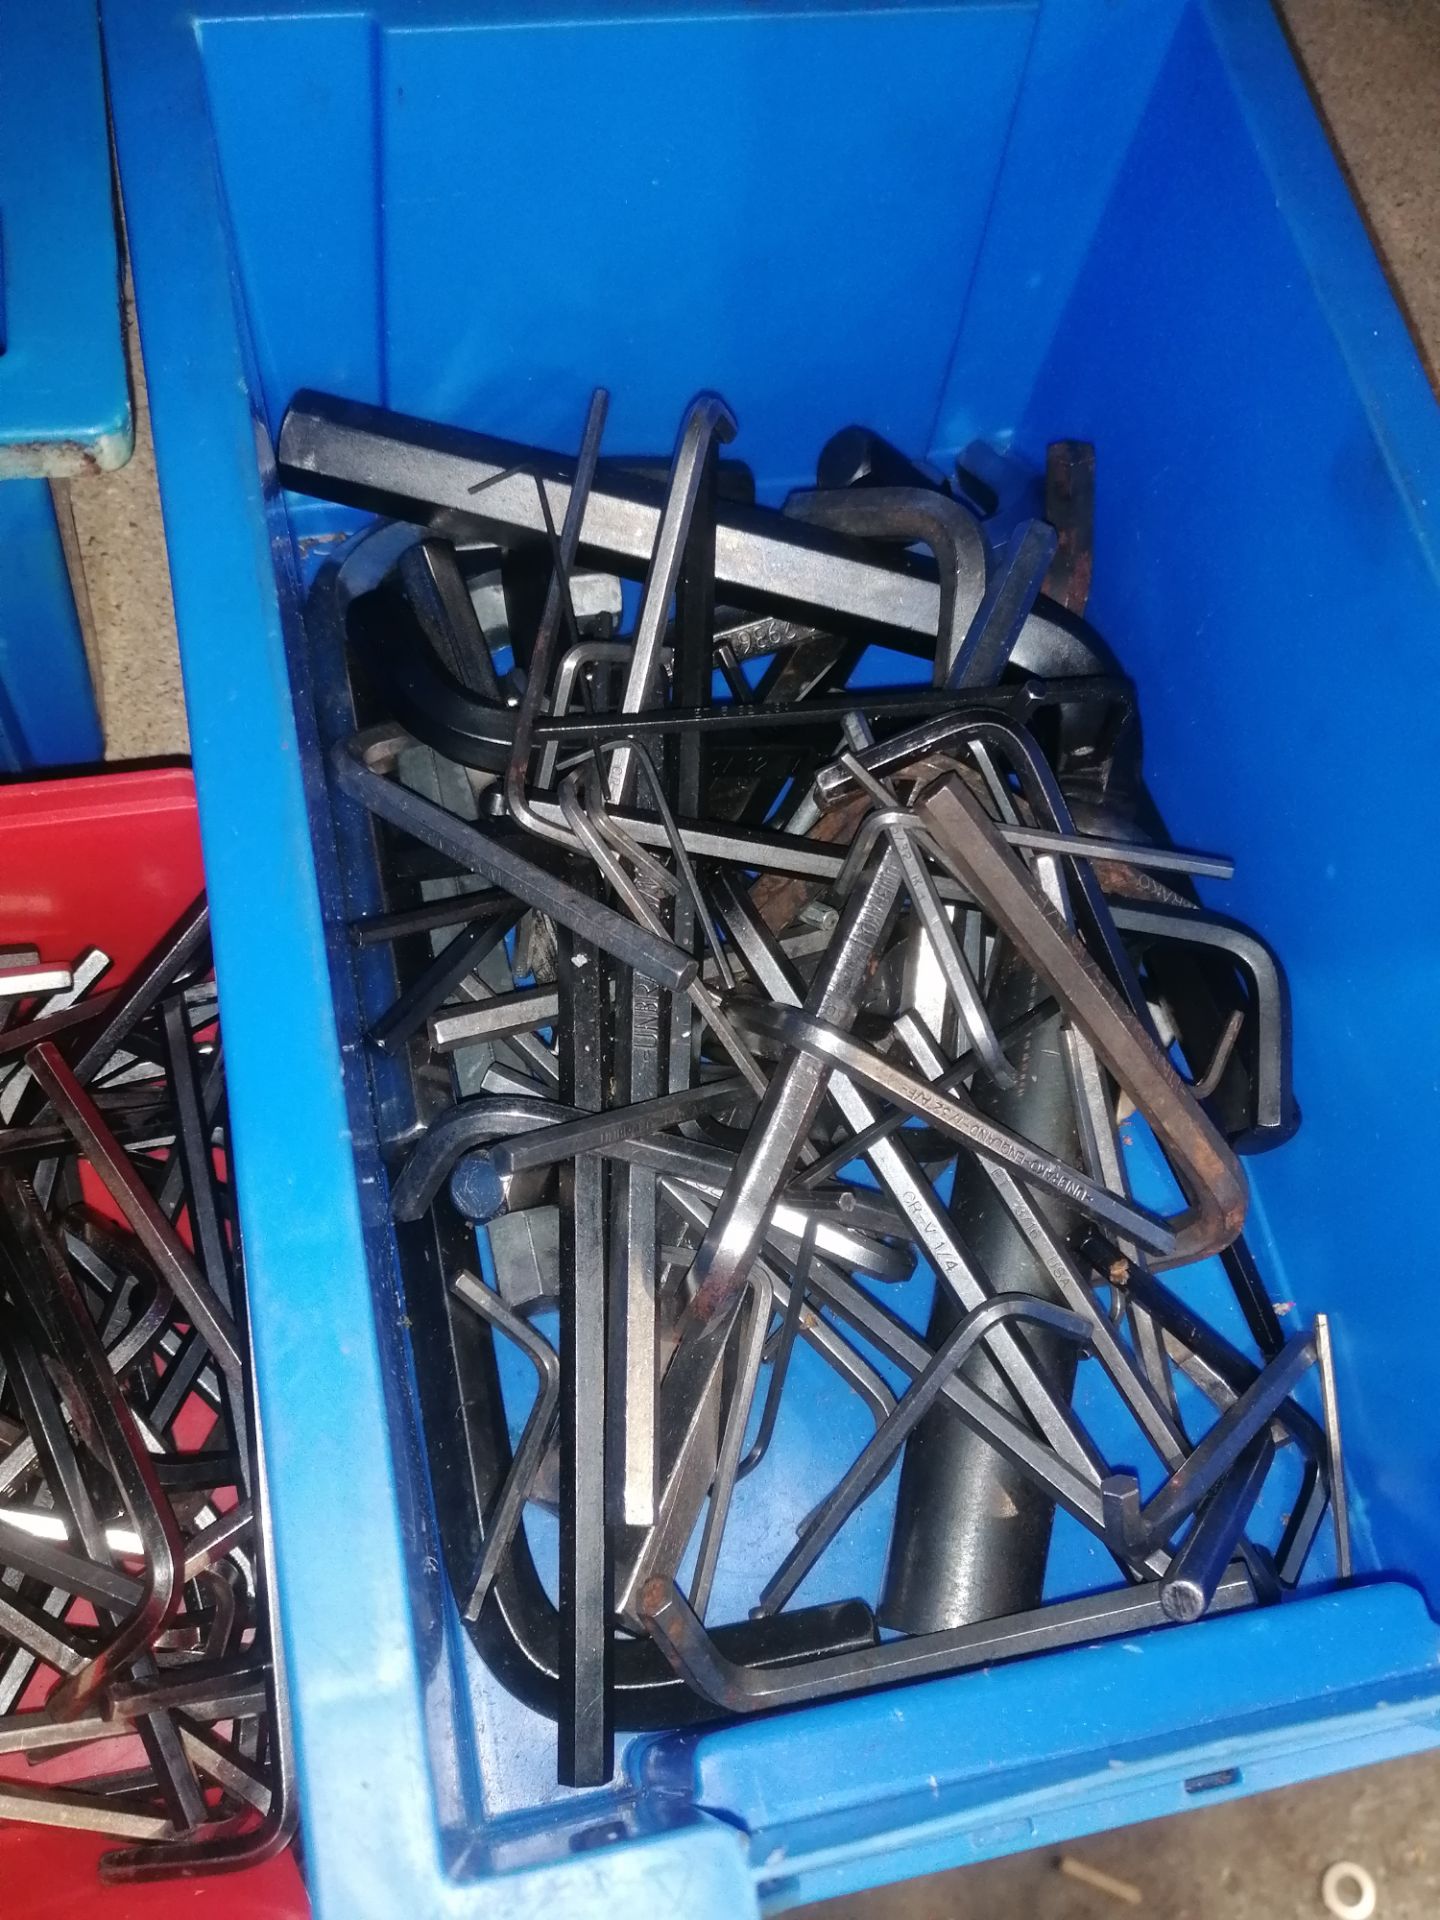 Various Allen Keys & Torque Keys (Please Note: Plastic Container Boxes Are Not Included) - Image 9 of 11